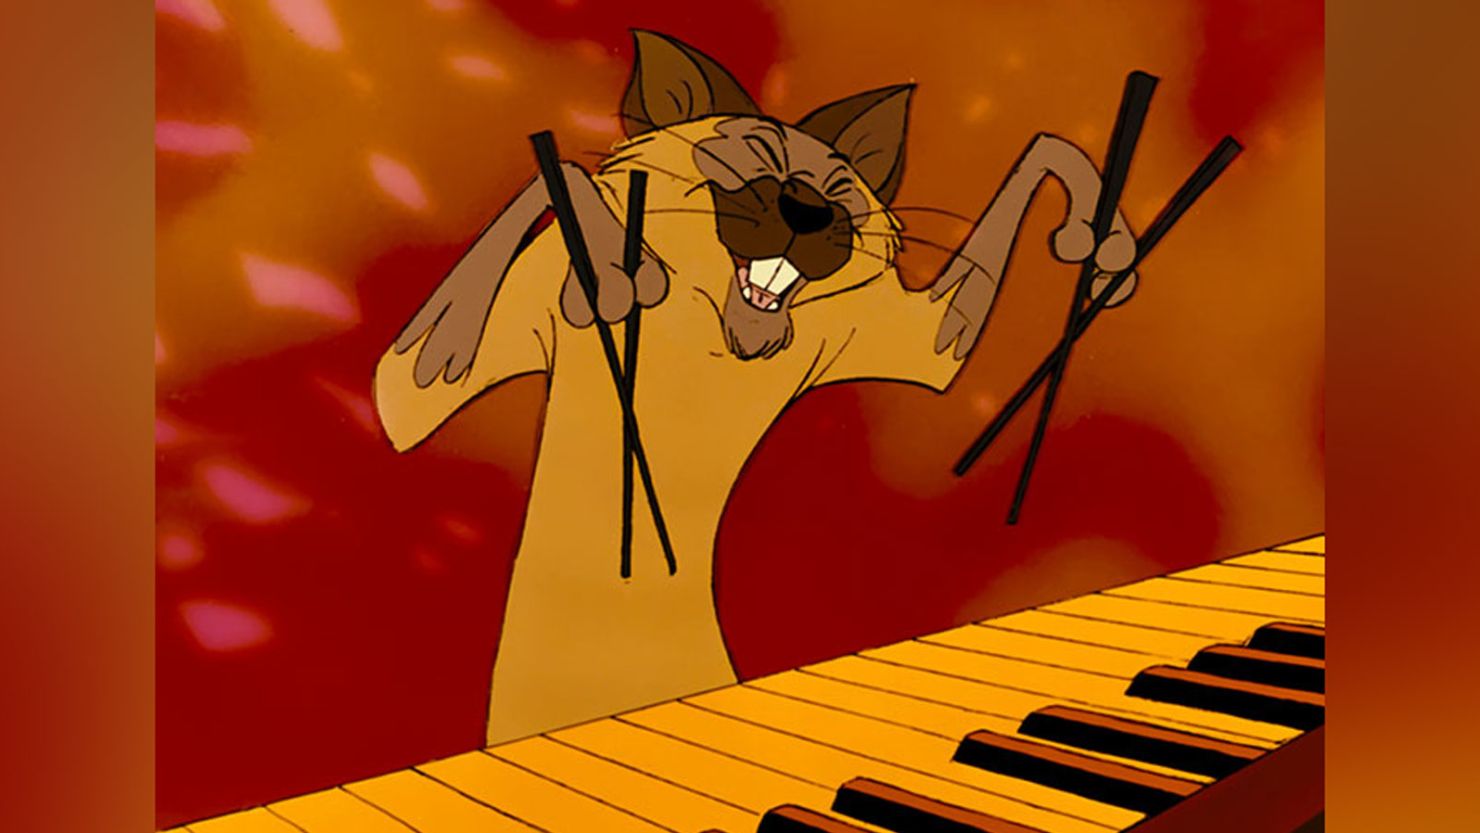 Viewers of "The Aristocats" see a warning that says: "The cat is depicted as a racist caricature of East Asian peoples with exaggerated stereotypical traits."